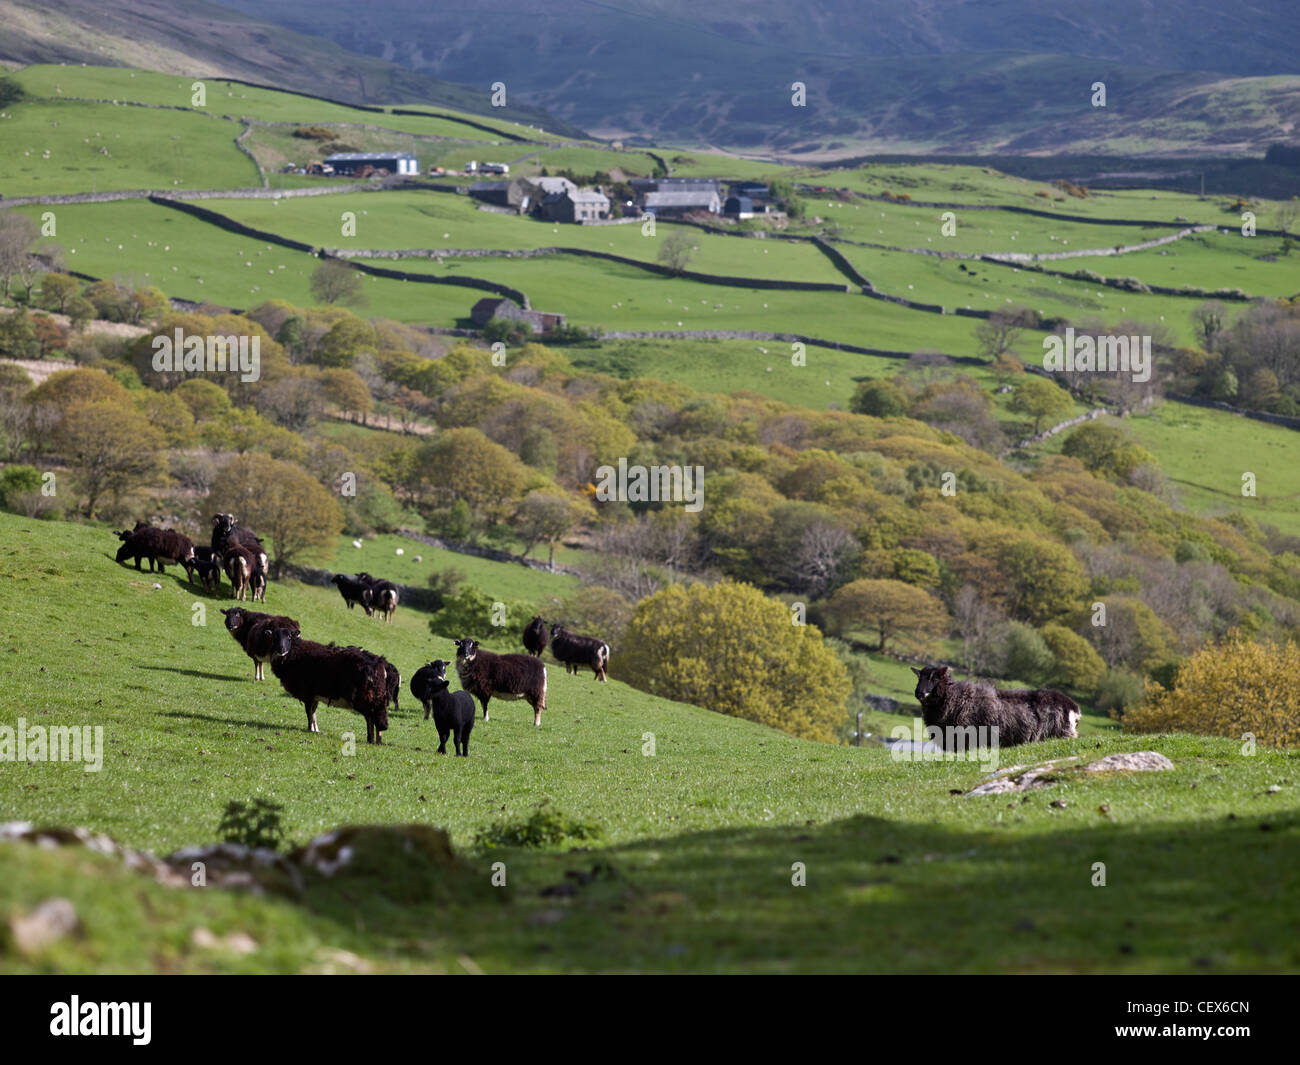 Welsh black mountain sheep grazing on farmland in the hills above the Mawddach Estuary. Stock Photo